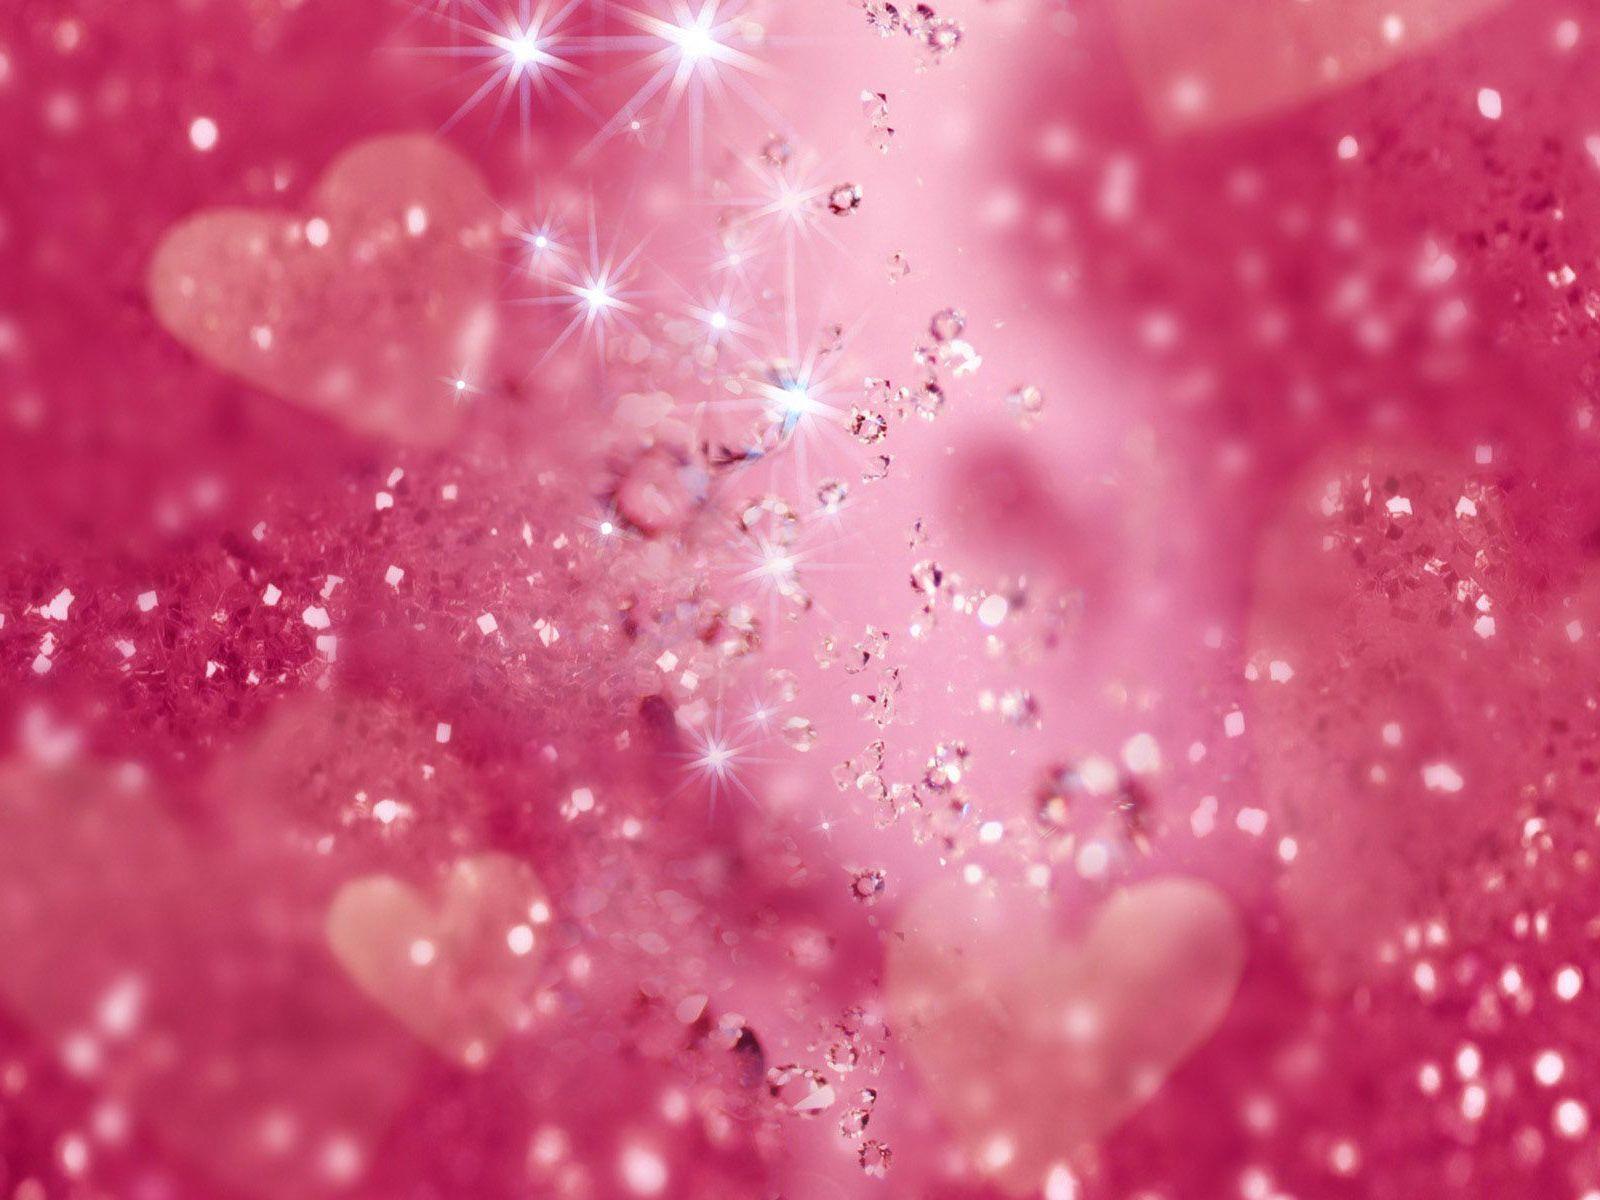 Pink Things Wallpapers - Wallpaper Cave